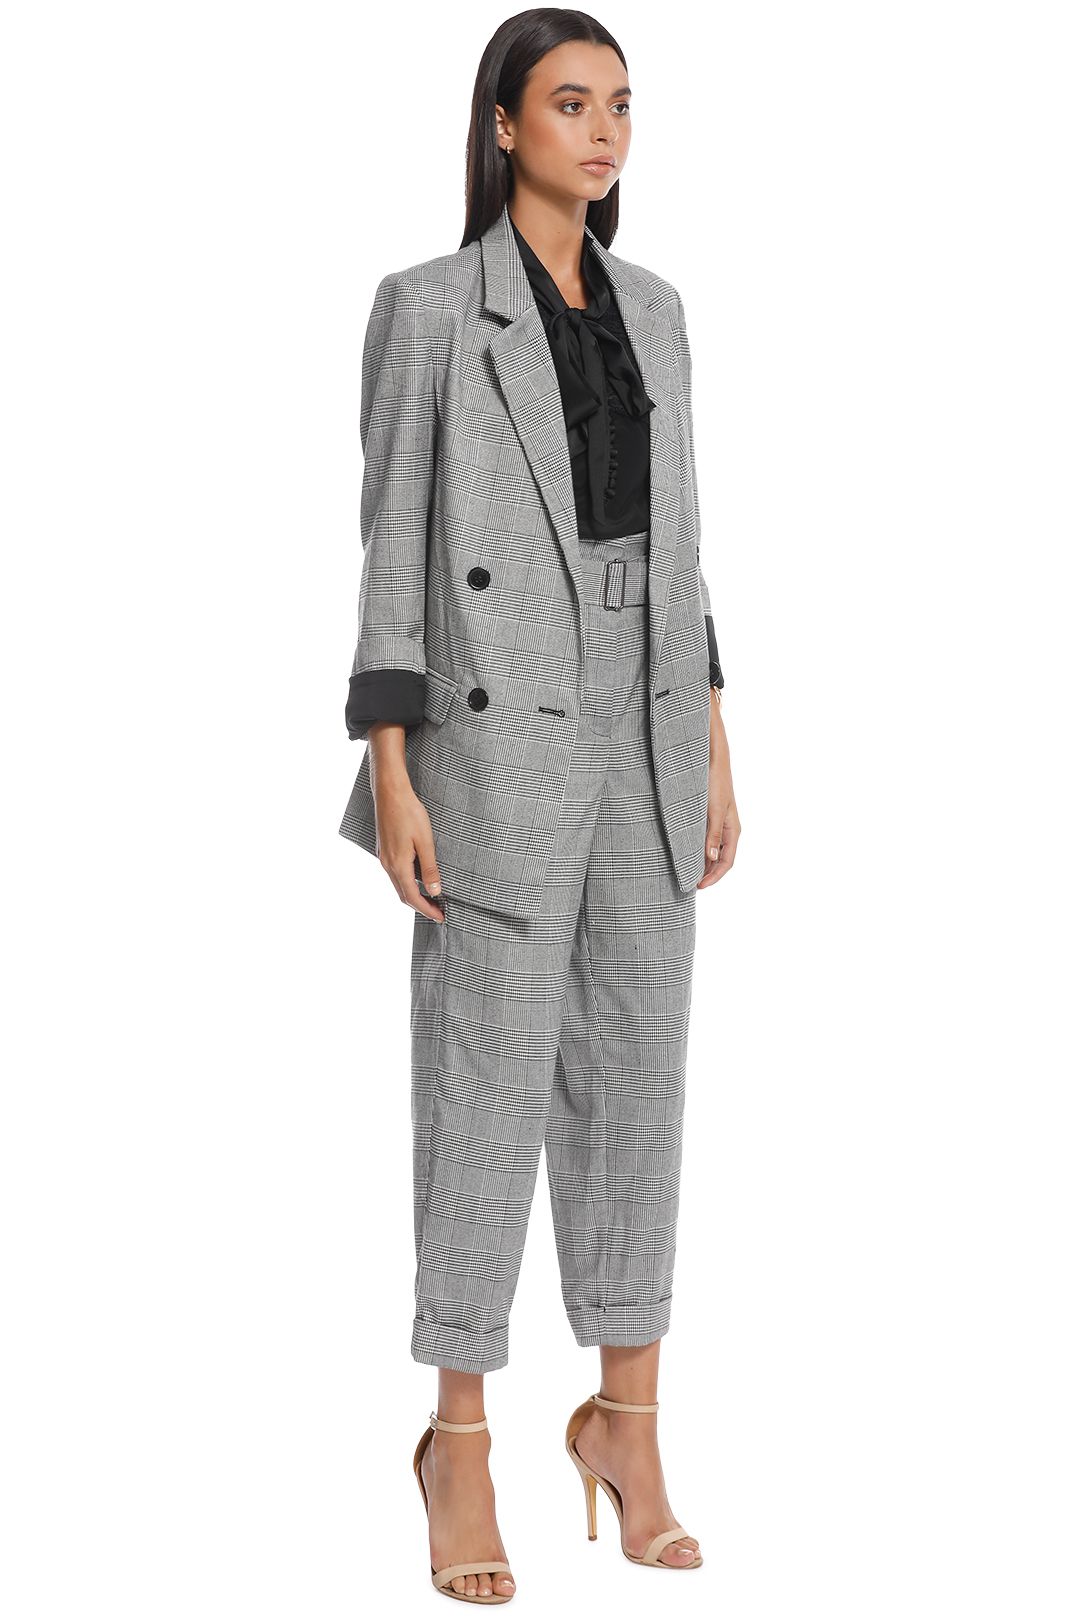 Nicholas the Label - Check Suiting Trouser - Side